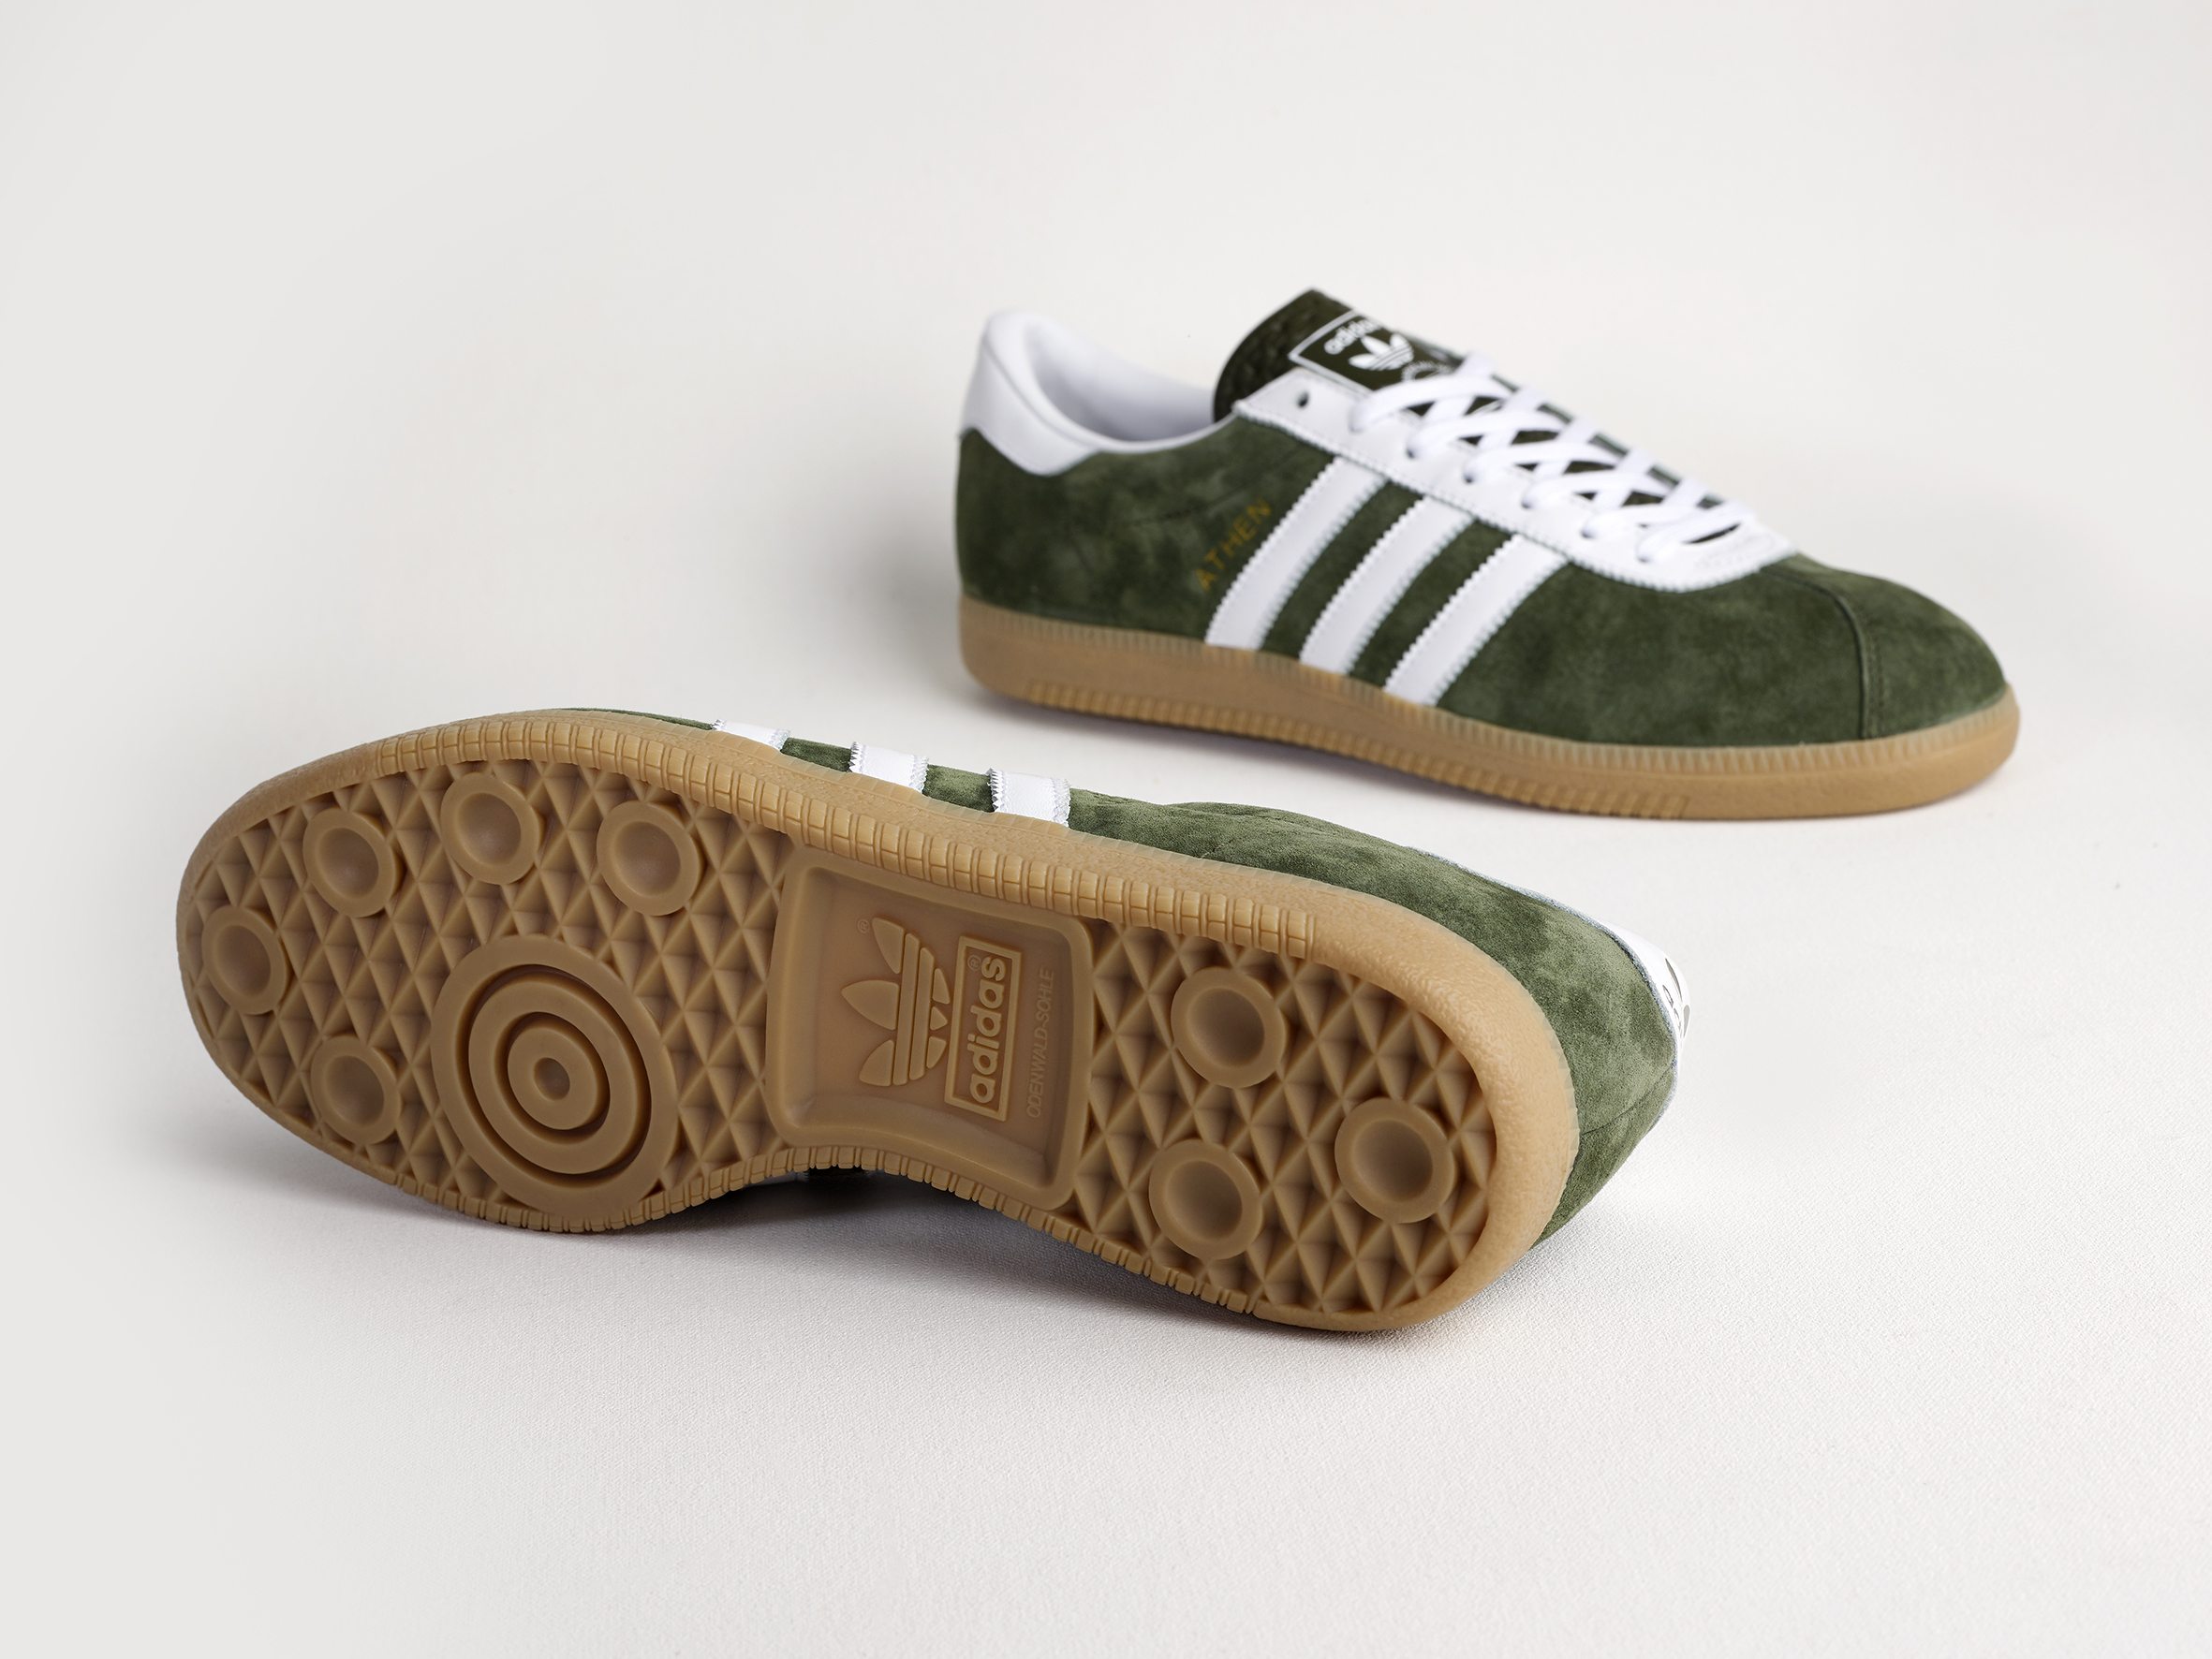 adidas Athen "Forest Green"